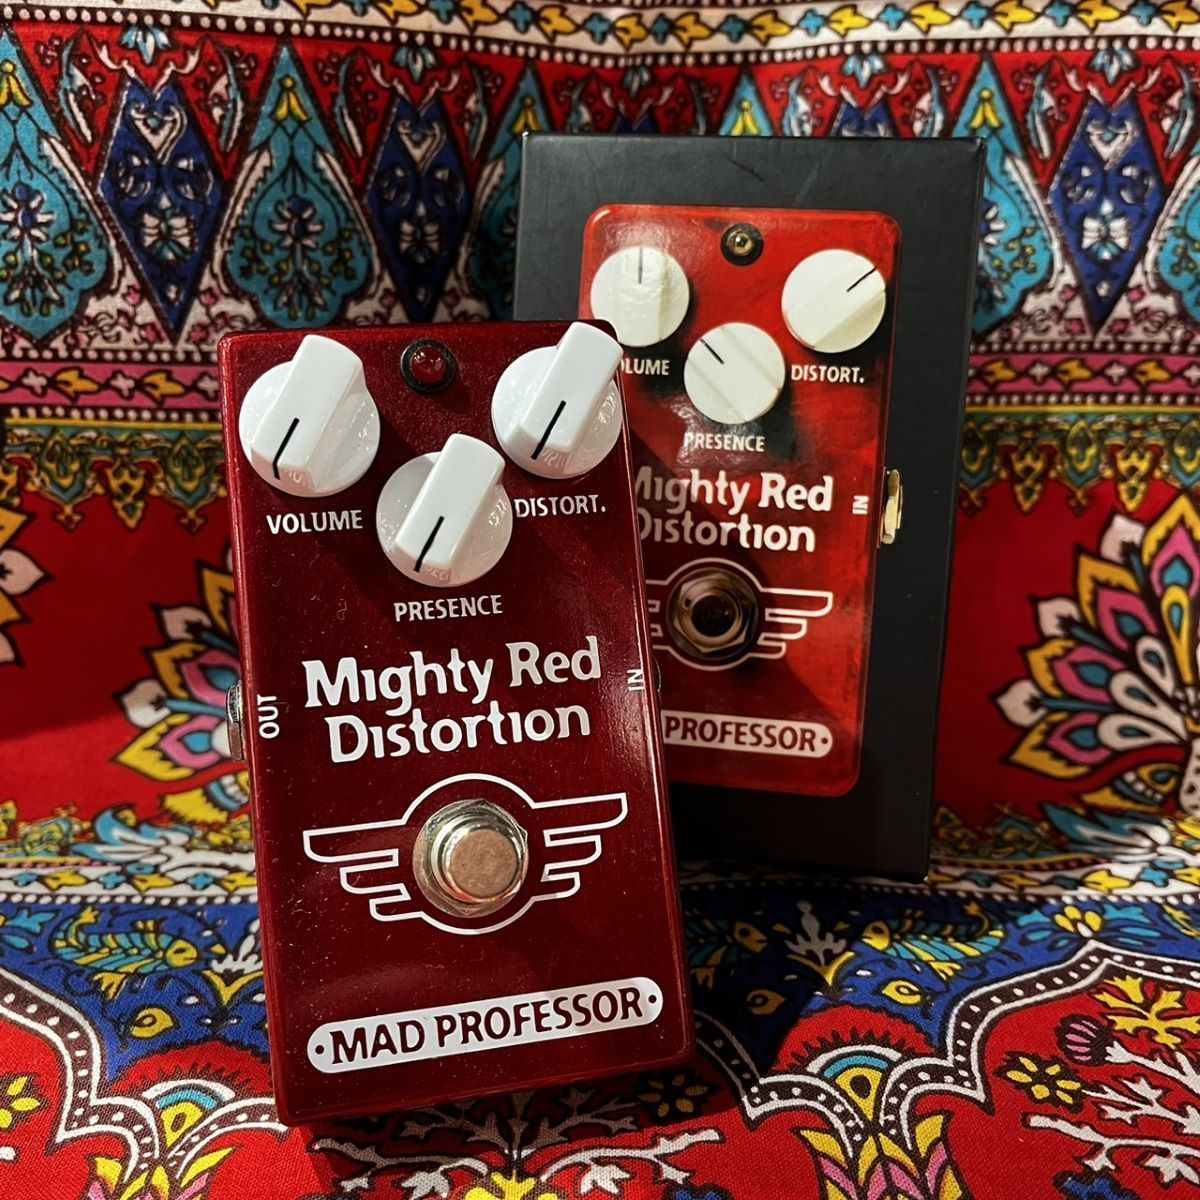 MAD PROFESSOR New Mighty Red Distortion コンパクトエフェクター